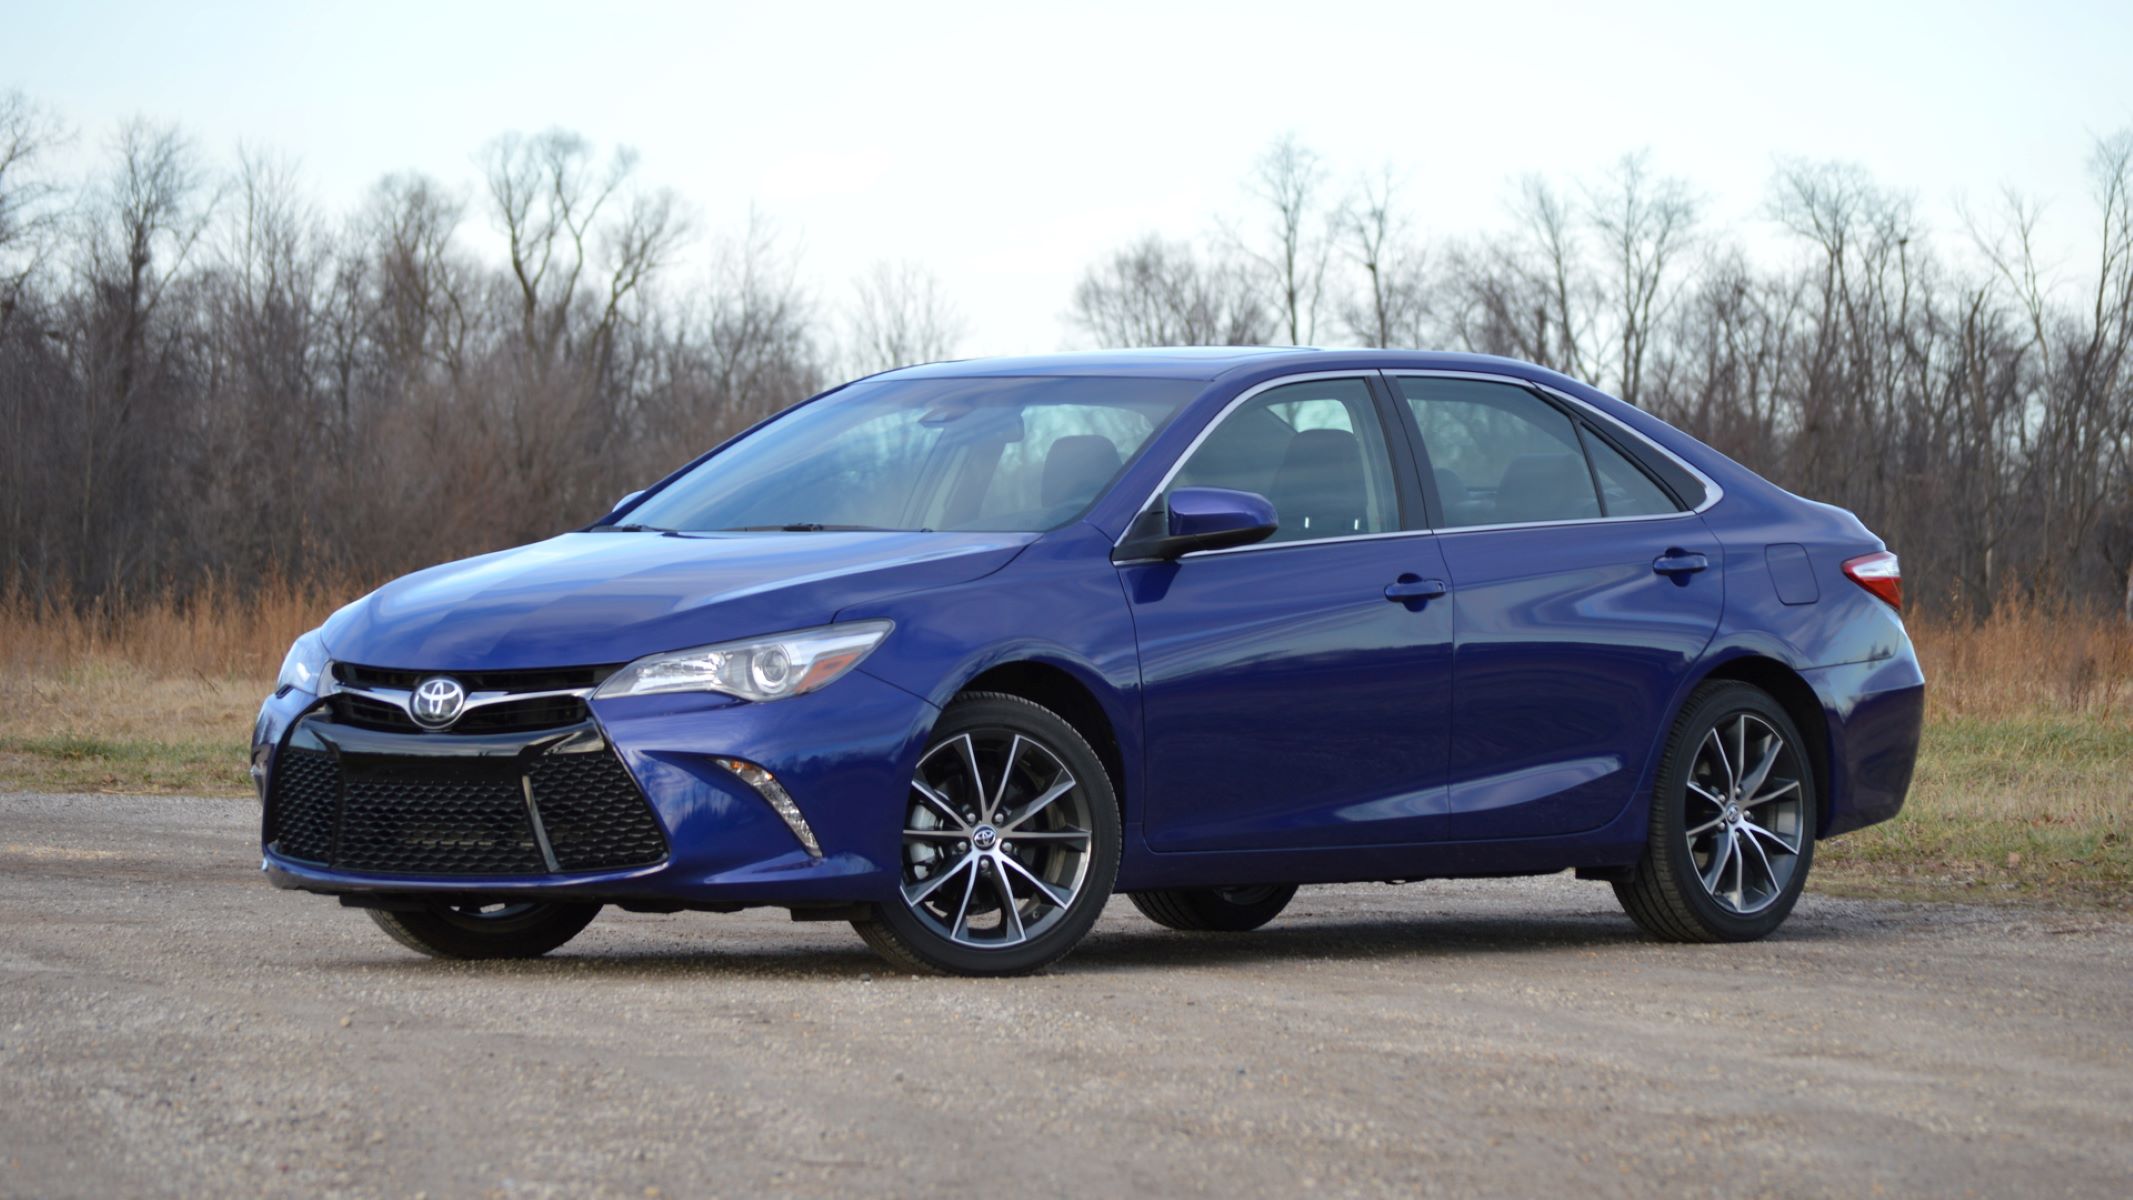 Unbelievable Deal: 2016 Toyota Camry With 120,000 Miles - Is It Worth It?